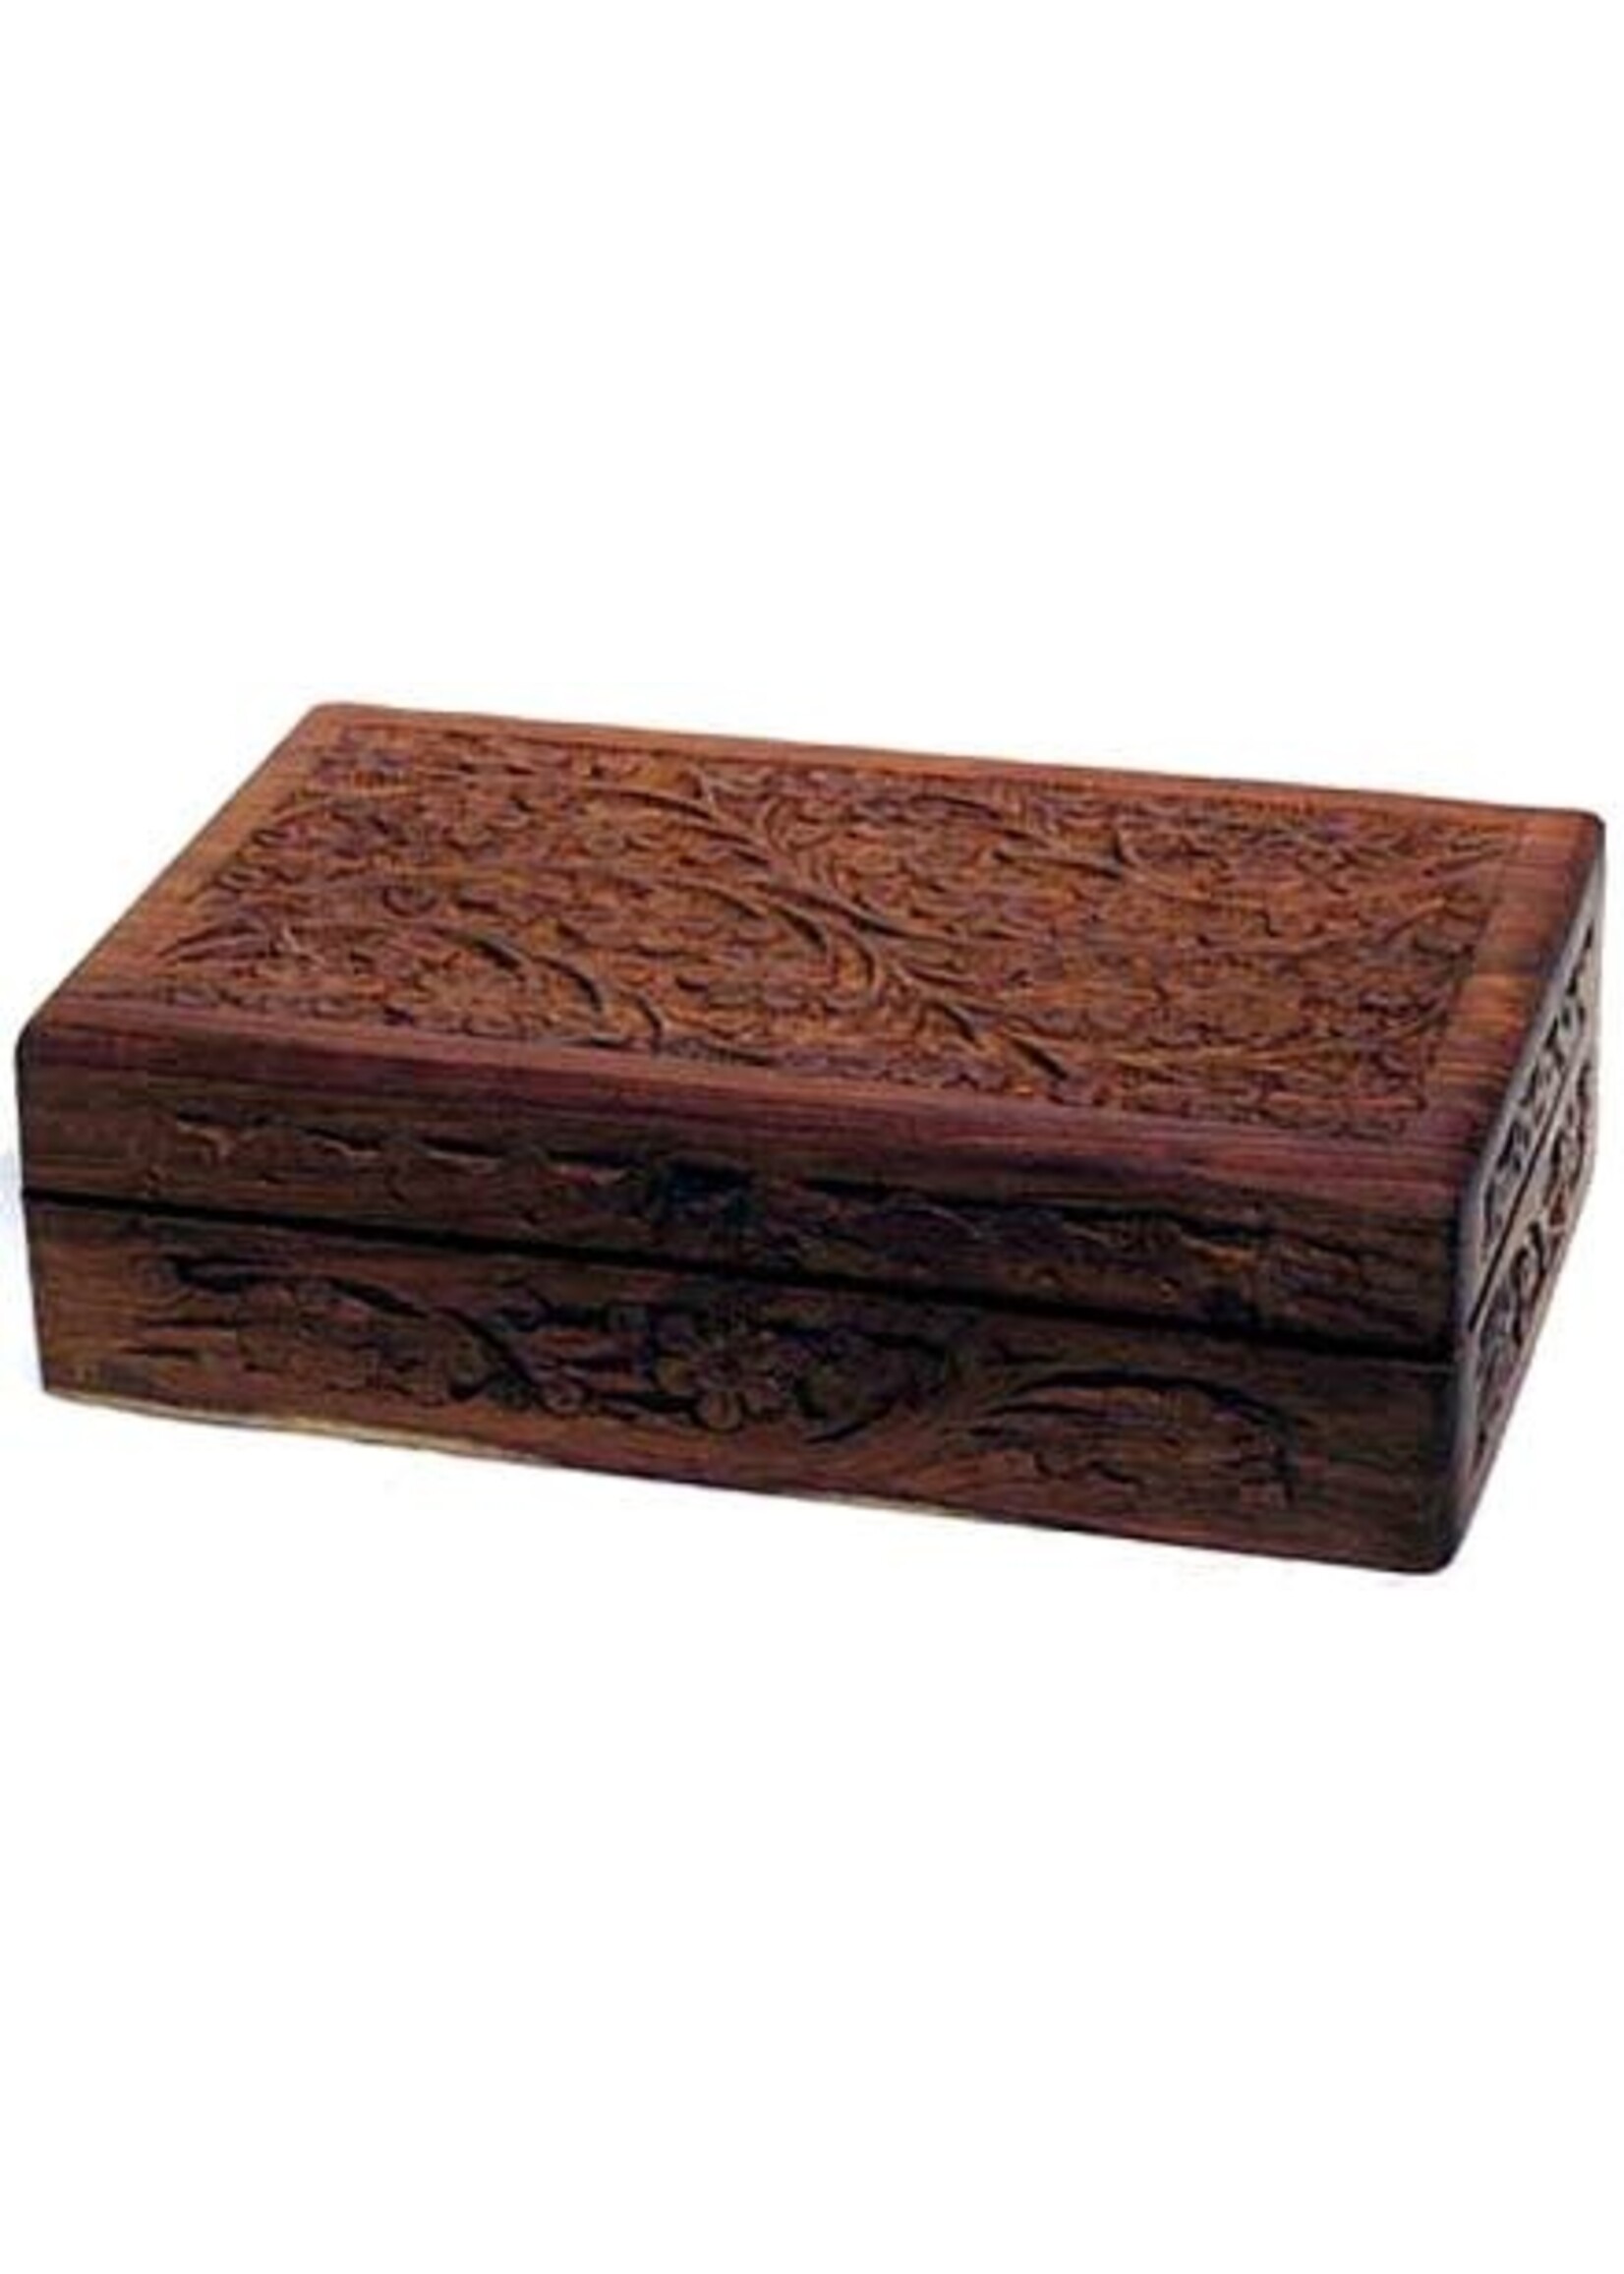 Floral Hand Carved Wooden Box - 5" x 8"